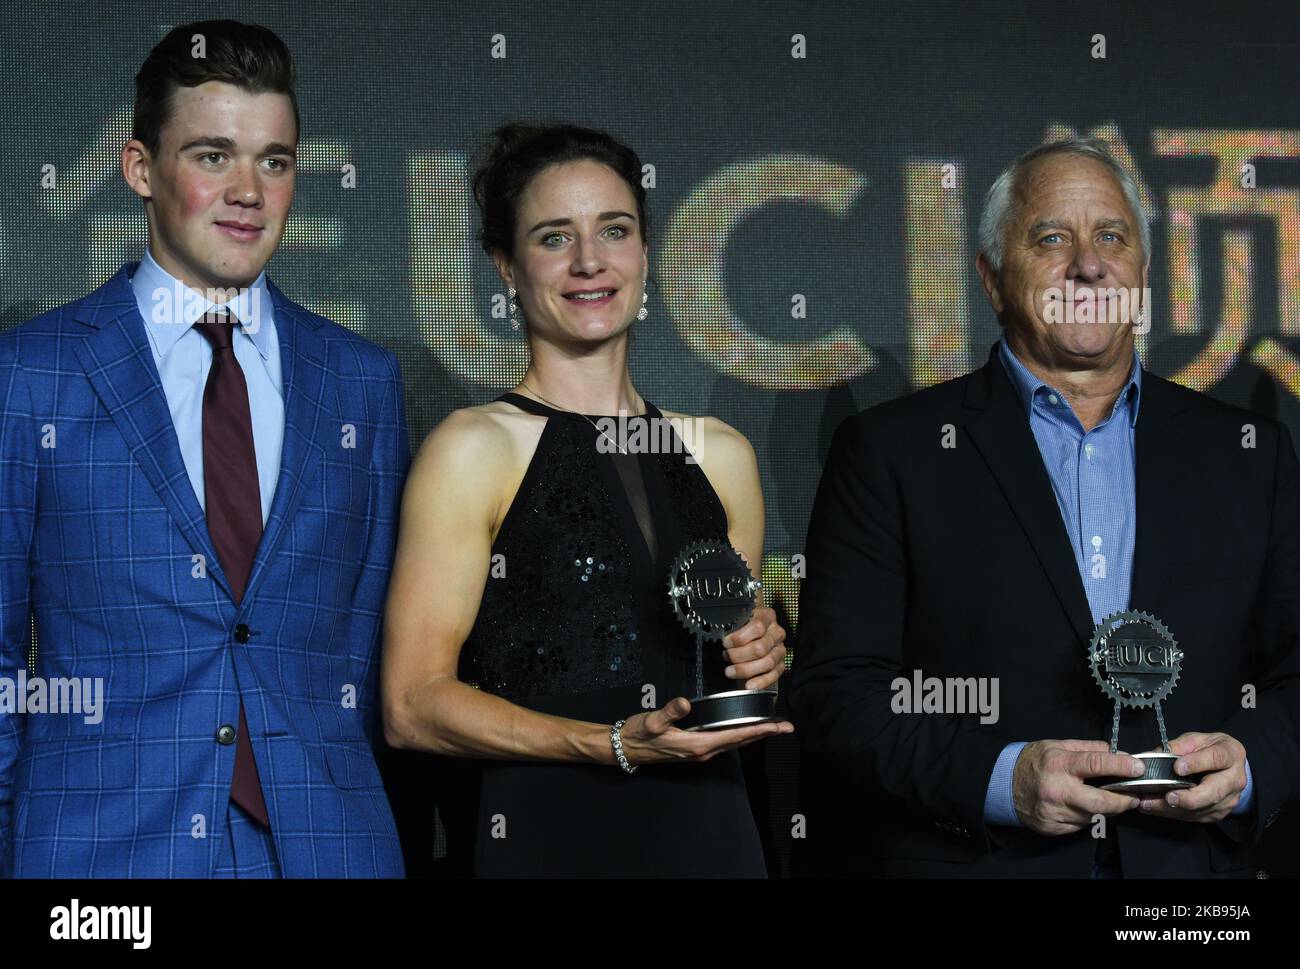 Mads Pedersen (Denmark/Team Trek–Segafredo), Marianne Vos (Netherland/Team CCC Liv) and Greg LeMond (USA), seen during the 5th UCI Cycling Gala in Guilin. On Tuesday, October 22, 2019, in Guilin, Guangxi Region, China. (Photo by Artur Widak/NurPhoto) Stock Photo